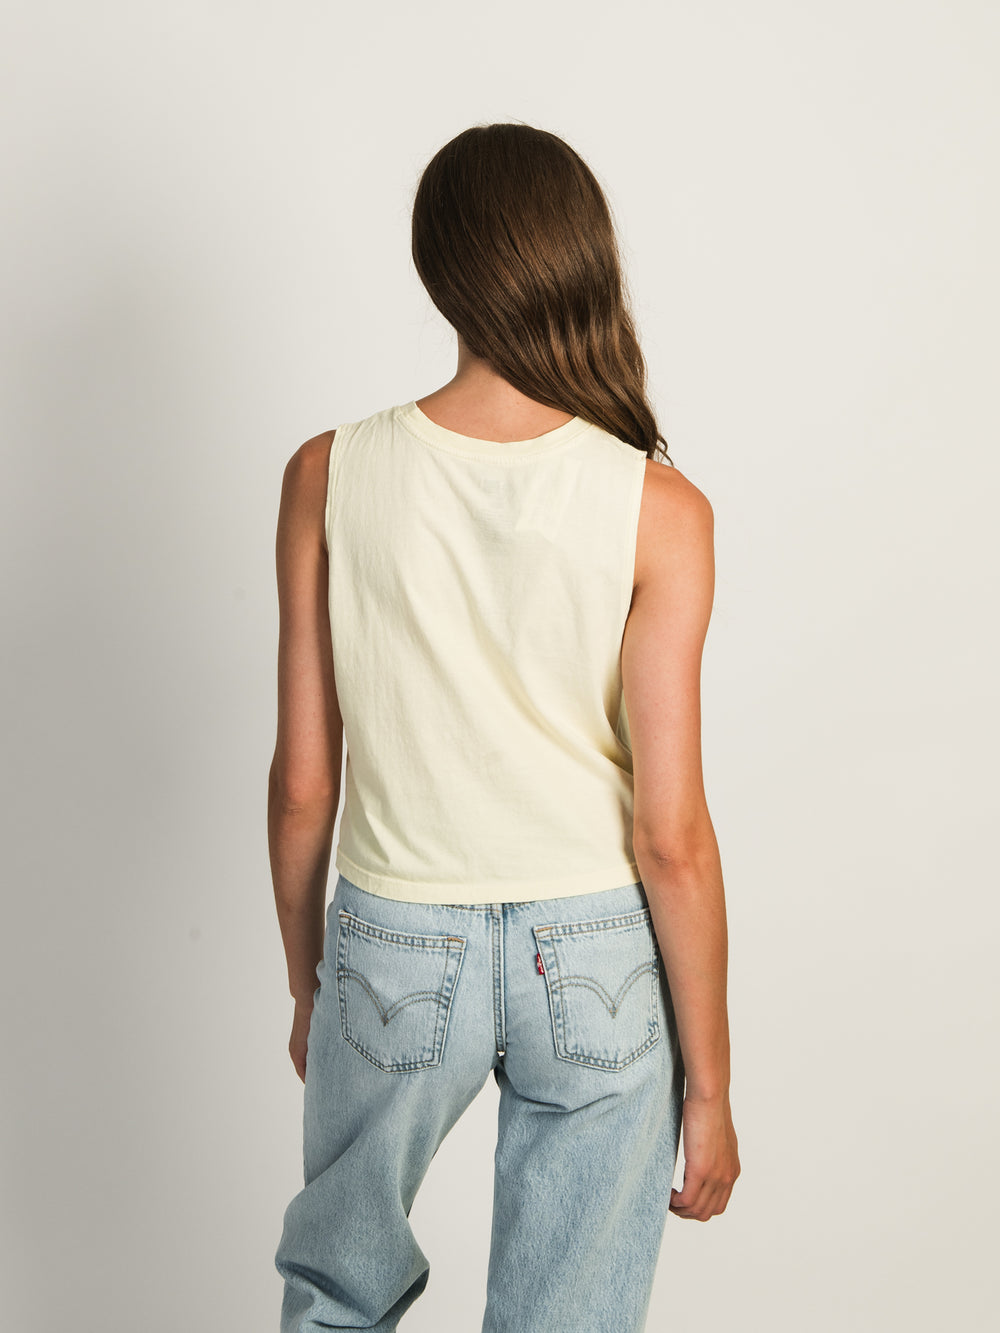 SALTY CREW MESSAGE CROPPED TANK TOP